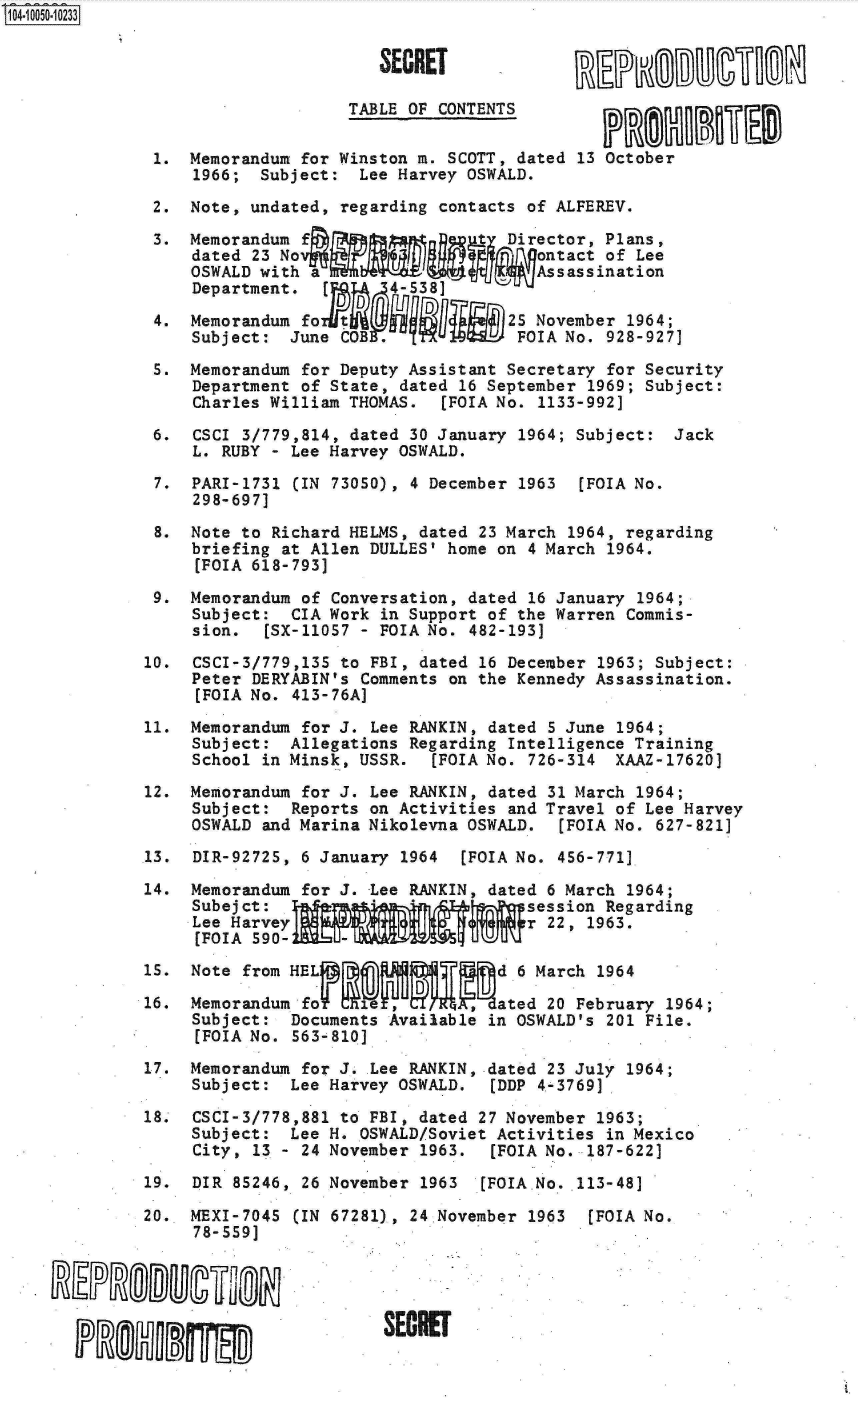 handle is hein.jfk/jfkarch00009 and id is 1 raw text is: 104-10050-10233


                                      SECRET

                                   TABLE OF CONTENTS


               1.  Memorandum for Winston m. SCOTT, dated 13 October
                   1966;  Subject:  Lee Harvey OSWALD.

               2.  Note, undated, regarding contacts of ALFEREV.

               3.  Memorandum                      Dirtor,   Plans,
                   dated 23 No ;;                     ontact of Lee
                   OSWALD with a                      Assassination
                   Department.         4-538]

               4.  Memorandum fo                   25 November  1964;
                   Subject:  June COB .             FOIA No. 928-927]

               5.  Memorandum for Deputy Assistant Secretary for Security
                   Department of State, dated 16 September 1969; Subject:
                   Charles William THOMAS.  [FOIA No. 1133-992]

               6.  CSCI 3/779,814, dated 30 January 1964; Subject:  Jack
                   L. RUBY - Lee Harvey OSWALD.
               7.  PARI-1731 (IN 73050), 4 December 1963   [FOIA No.
                   298-697]

               8.  Note to Richard HELMS, dated 23 March 1964, regarding
                   briefing at Allen DULLES' home on 4 March 1964.
                   [FOIA 618-793]

               9.  Memorandum of Conversation, dated 16 January  1964;
                   Subject:  CIA Work in Support of the Warren Commis-
                   sion.  [SX-11057 - FOIA No. 482-193]

              10.  CSCI-3/779,135 to FBI, dated 16 December 1963; Subject:
                   Peter DERYABIN's Comments on the Kennedy Assassination.
                   [FOIA No. 413-76A]

              11.  Memorandum for J. Lee RANKIN, dated 5 June 1964;
                   Subject:  Allegations Regarding Intelligence Training
                   School in Minsk, USSR.   [FOIA No. 726-314 XAAZ-17620]

              12.  Memorandum for J. Lee RANKIN, dated 31 March 1964;
                   Subject:  Reports on Activities and Travel of Lee Harvey
                   OSWALD and Marina Nikolevna OSWALD.   [FOIA No. 627-821]

              13.  DIR-92725, 6 January 1964   [FOIA No. 456-771]

              14.  Memorandum for J. Lee RANKIN, dated 6 March 1964;
                   Subejct:          '               session Regarding
                   Lee Harvey                        r 22, 1963.
                   [FOIA 590-

              15.  Note from HEL                  d 6 March 1964
              16.  Memorandum fov 8o, ,  M      ated 20 February 1964;
                   Subject:  Documents Available in OSWALD's 201 File.
                   IFOIA No. 563-810]

              17.  Memorandum for J. .Lee RANKIN, dated 23 July 1964;
                   Subject:  Lee Harvey OSWALD.   [DDP 4-3769]

              18.  CSCI-3/778,881 to FBI, dated 27 November 1963;
                   Subject:  Lee H. OSWALD/Soviet Activities in Mexico
                   City, 13 - 24 November 1963.   [FOIA No. 187-622]

              19.  DIR 85246, 26 November 1963   (FOIA.No. 113-48]

              20.. MEXI-7045 (IN 67281)1, 24 November 1963  [FOIA No.
                   78-559]





               P29Hg SECRE


